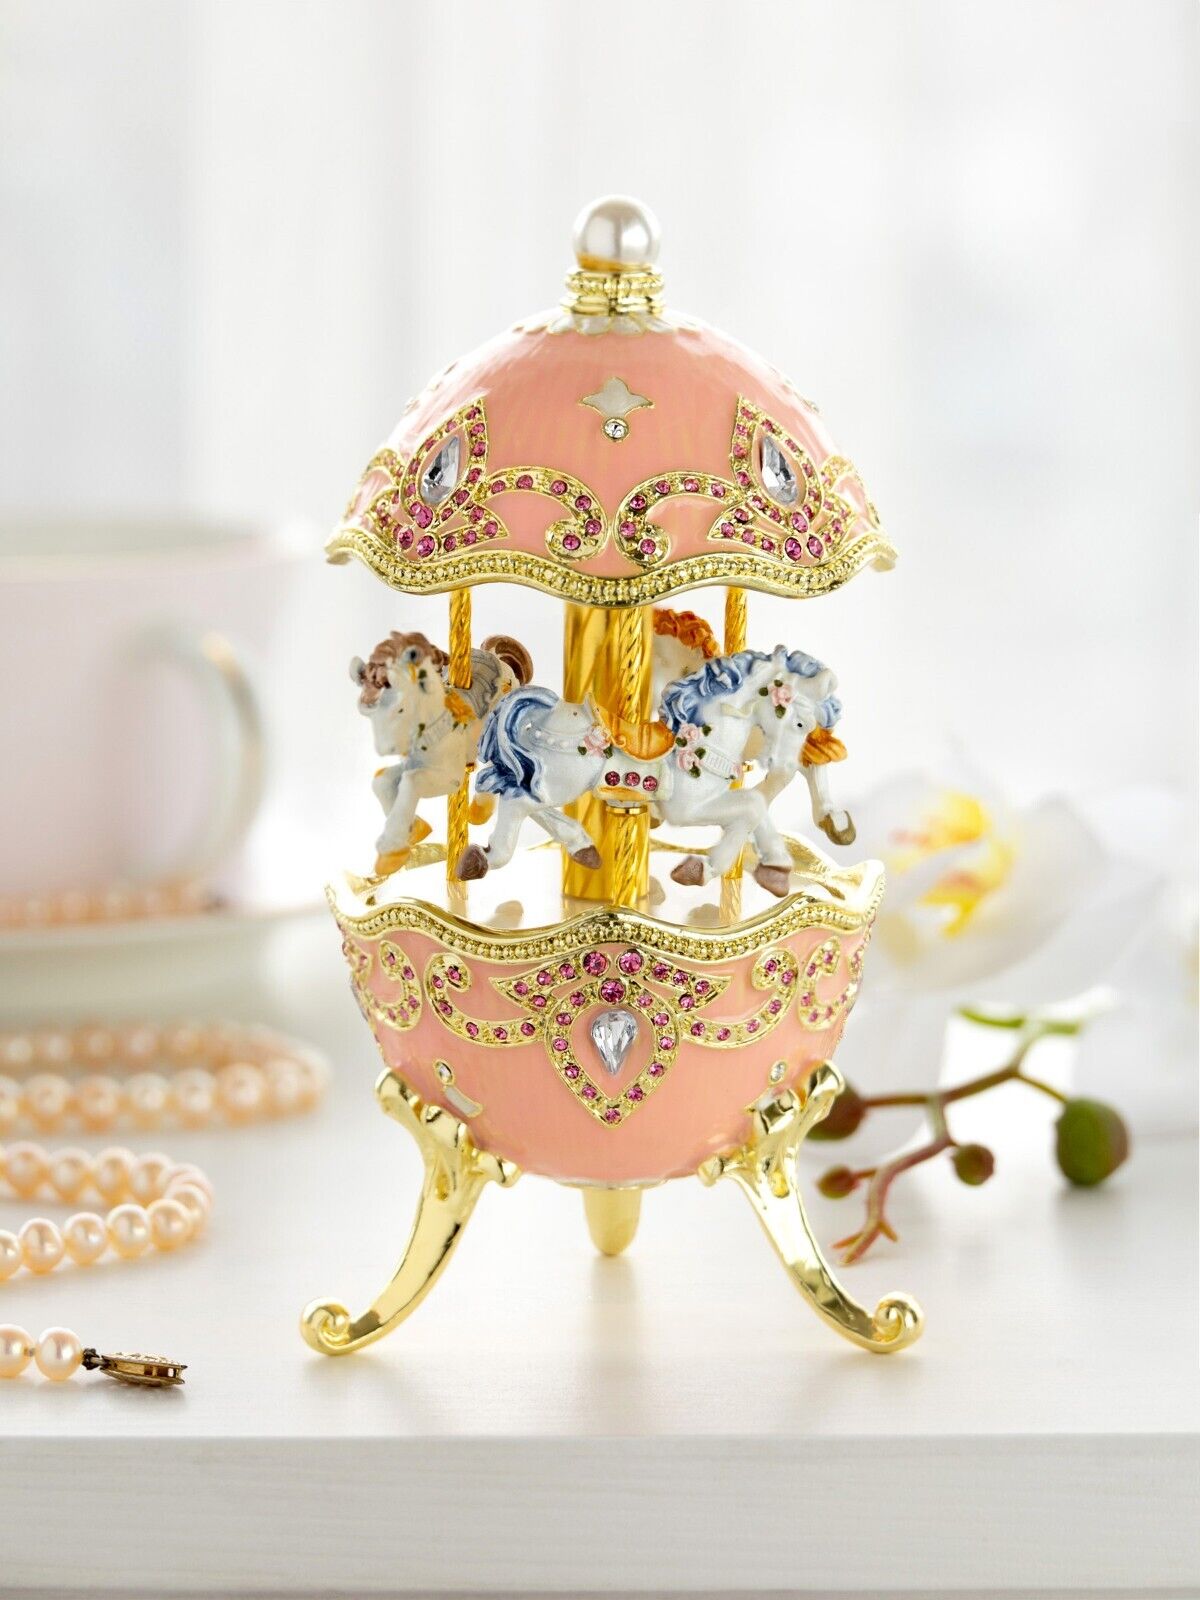 Keren Kopal Pink Wind up Horse Carousel Decorated with Austrian Crystals